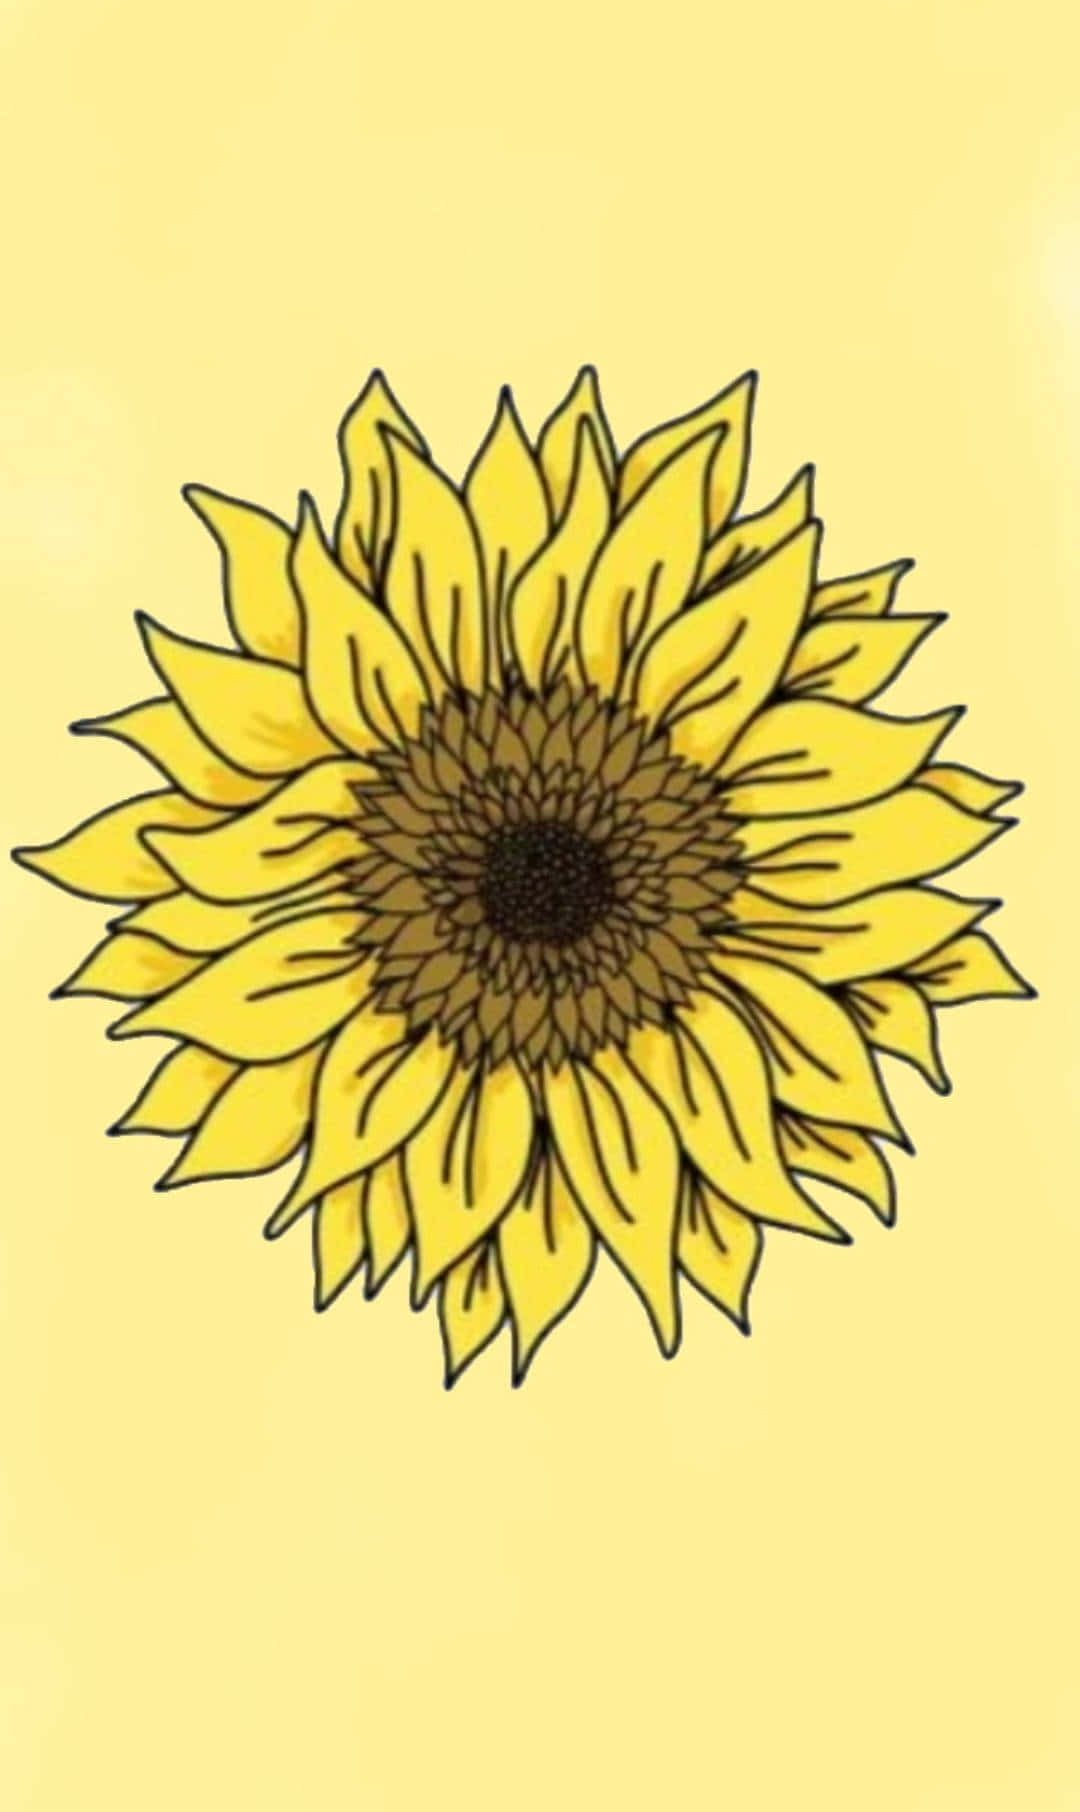 Download Sunflower Yellow Tumblr Aesthetic Wallpaper | Wallpapers.com